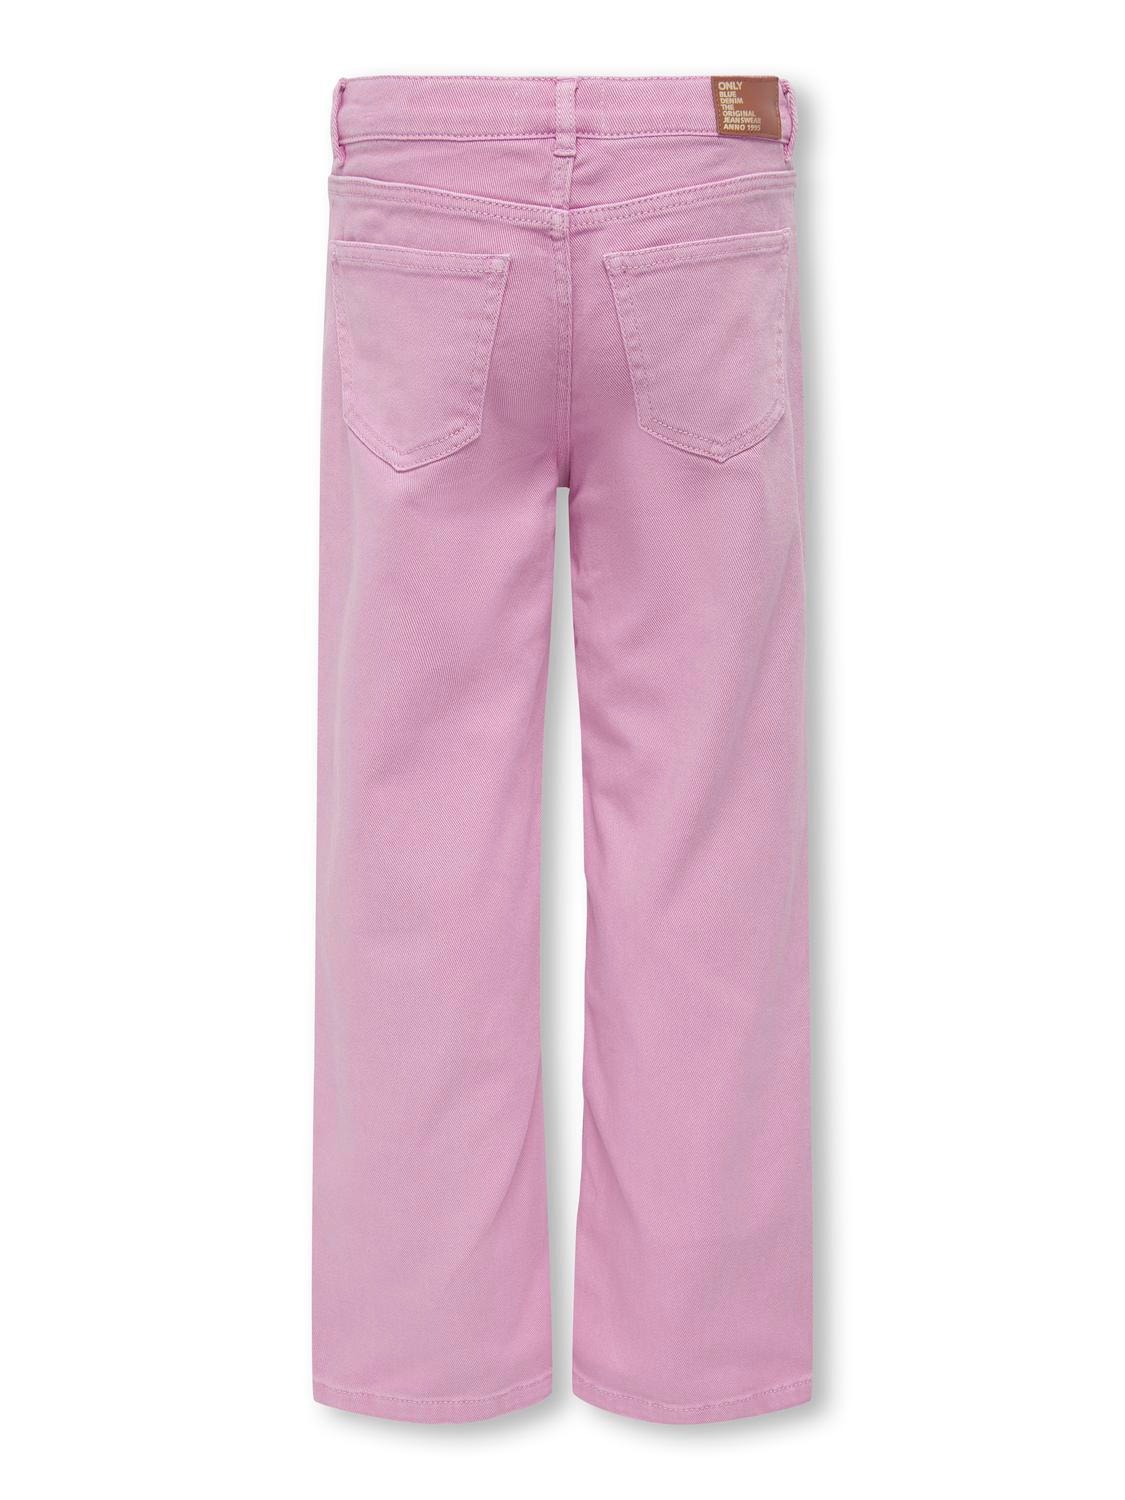 ONLY Pantalones Corte straight Cintura normal -Tickled Pink - 15273900